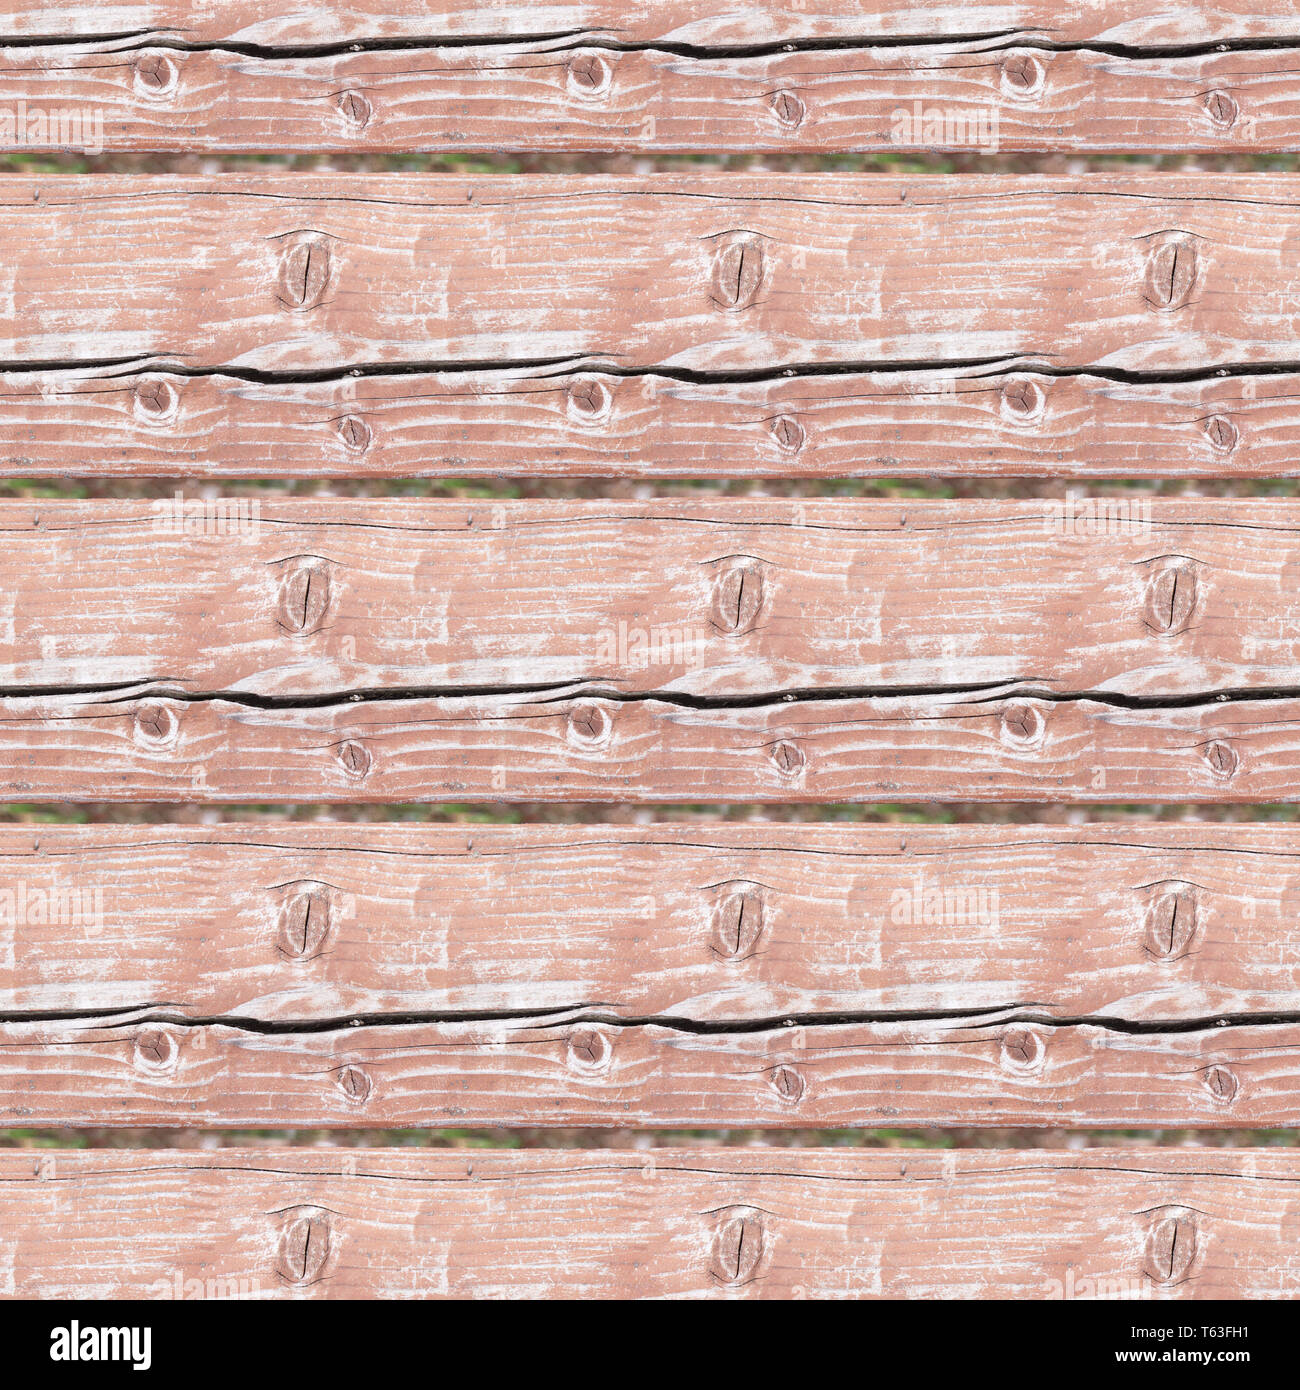 Seamless pattern of old wooden planks. Good for building walls design. May using in game development. Stock Photo